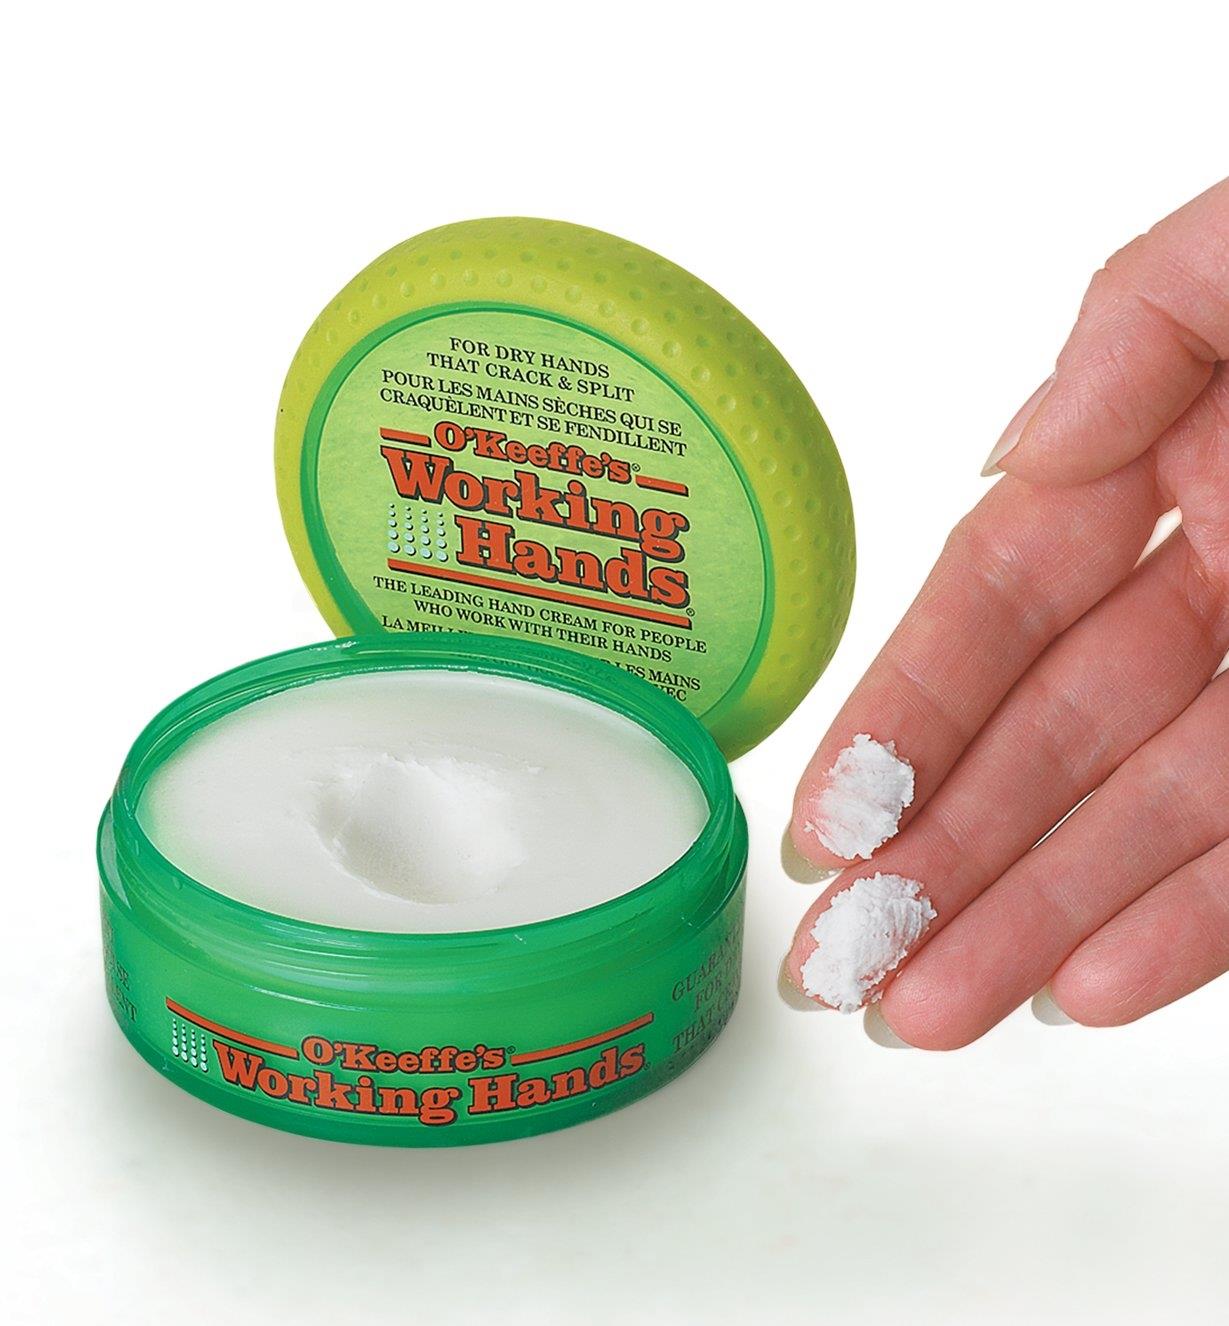 O'Keeffe's Working Hands Cream on a person's fingertips